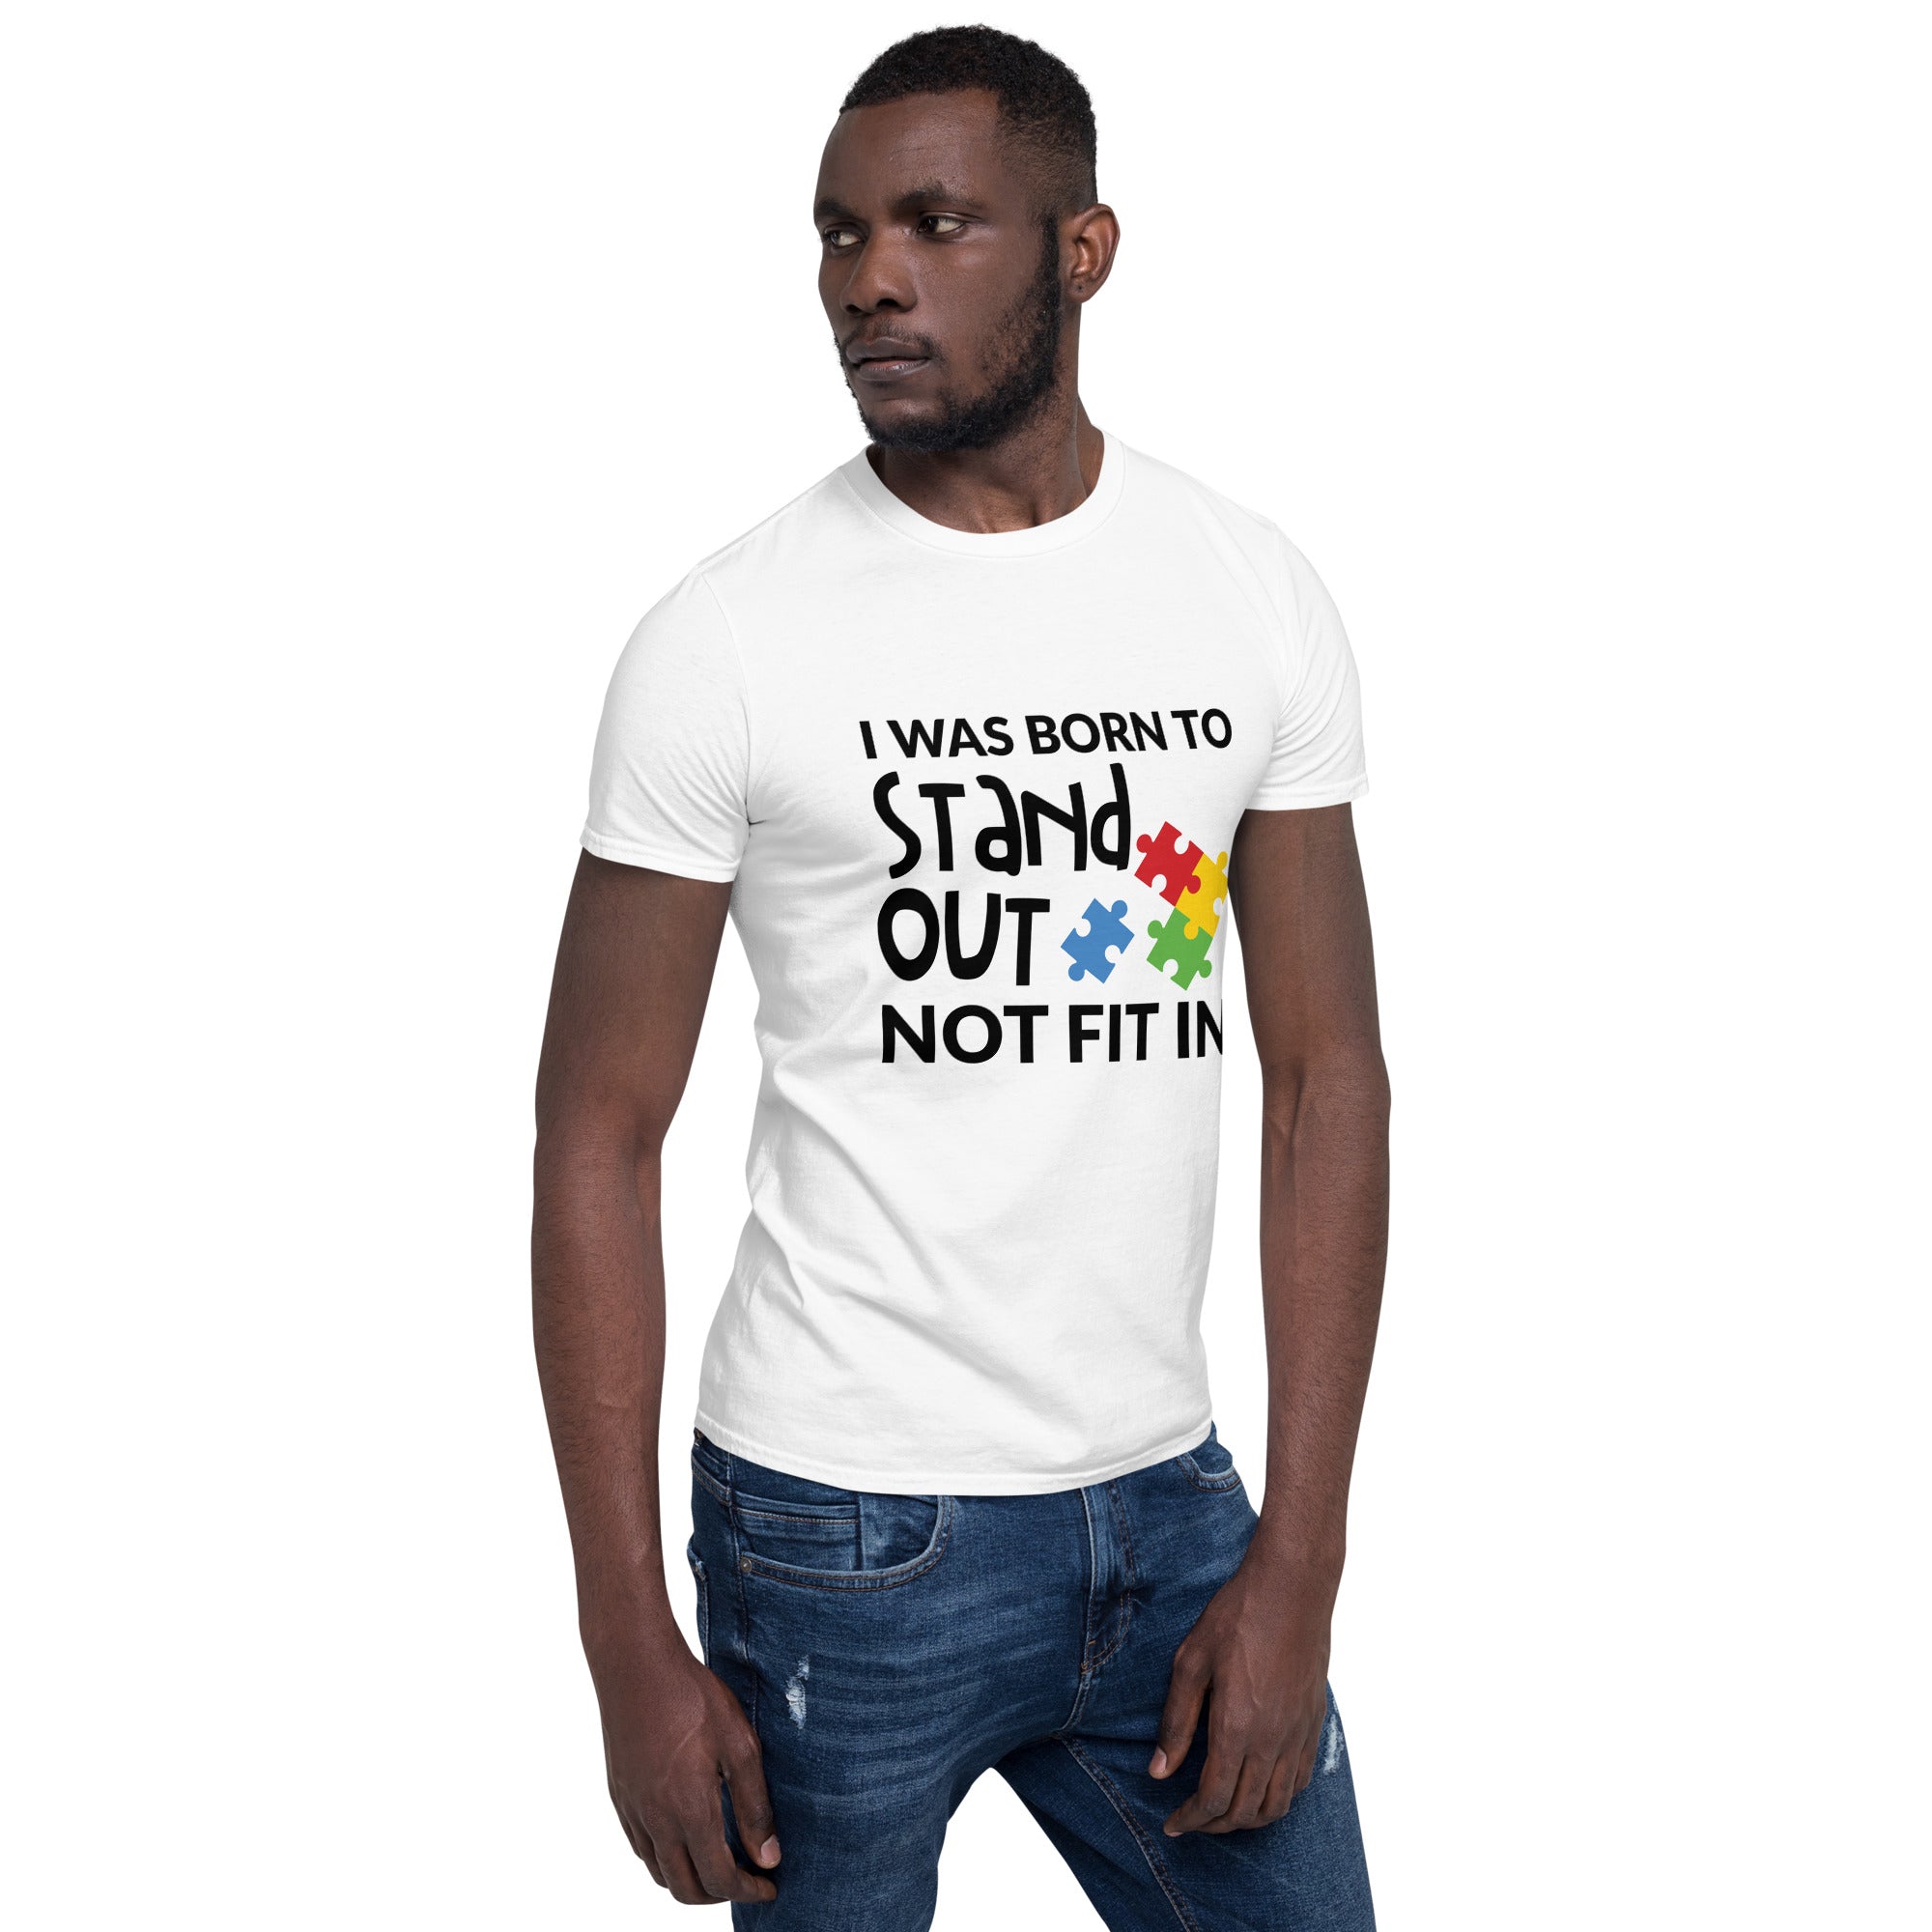 Short-Sleeve Unisex T-Shirt- I was born to stand out not fit in